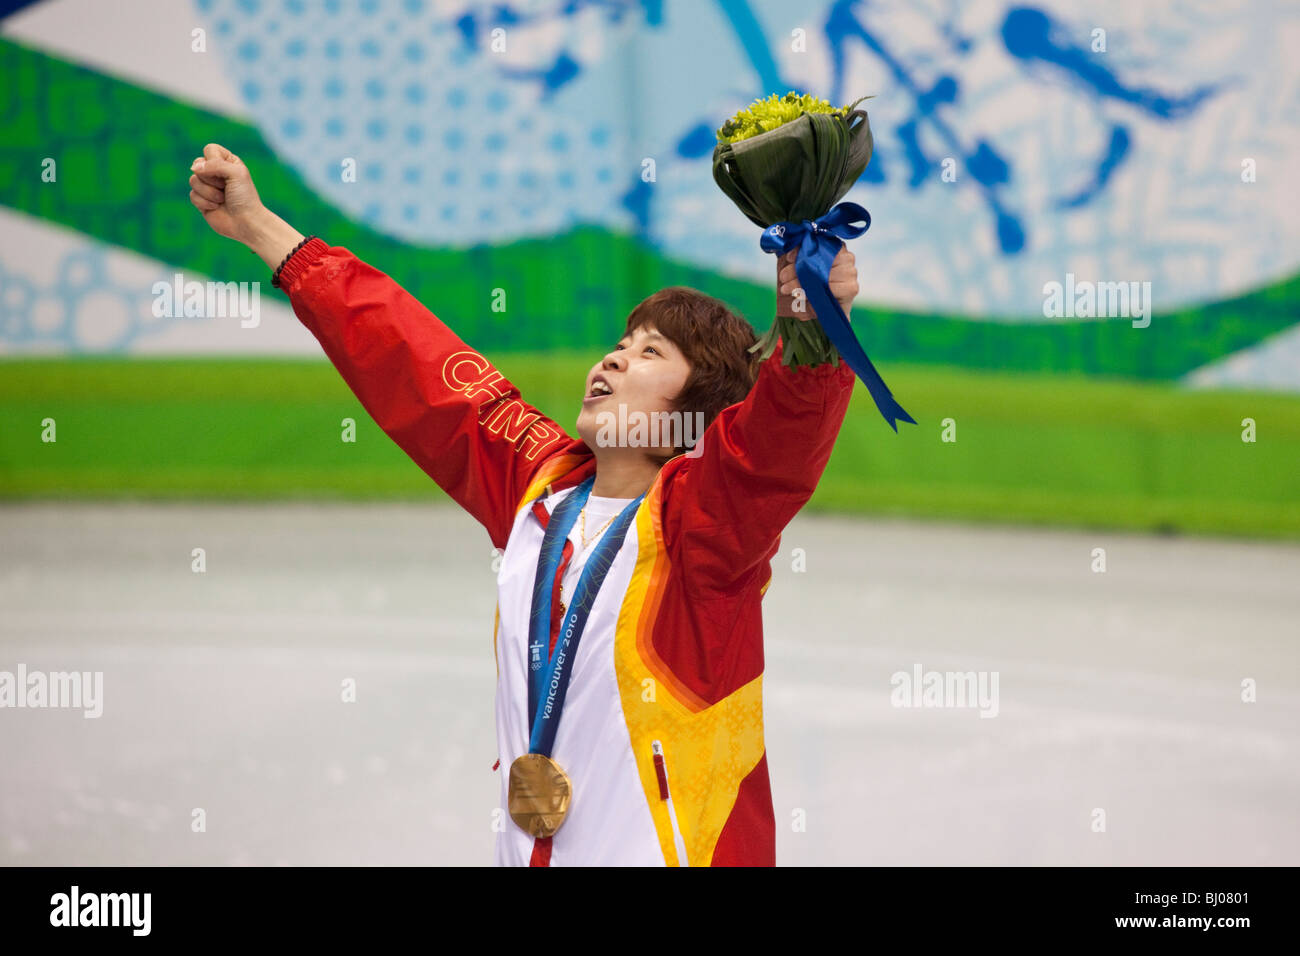 Wang Meng (CHN) reacts after receiving the gold medal in the Short Track Speed Skating Women's 1000m event at the 2010 Olympics Stock Photo